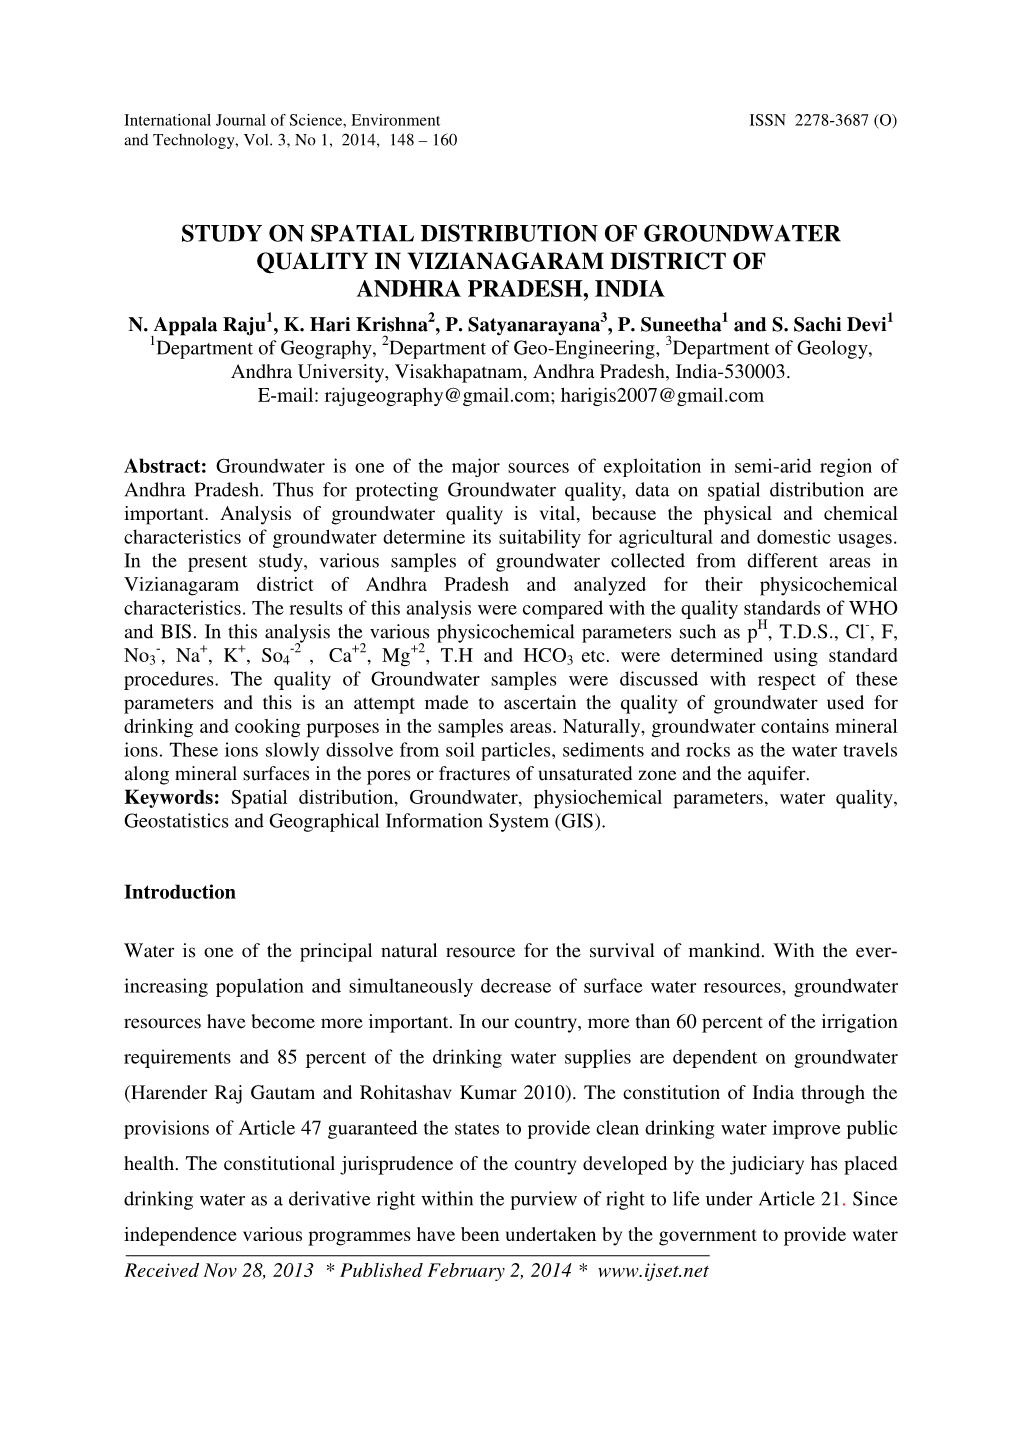 Study on Spatial Distribution of Groundwater Quality in Vizianagaram District of Andhra Pradesh, India N